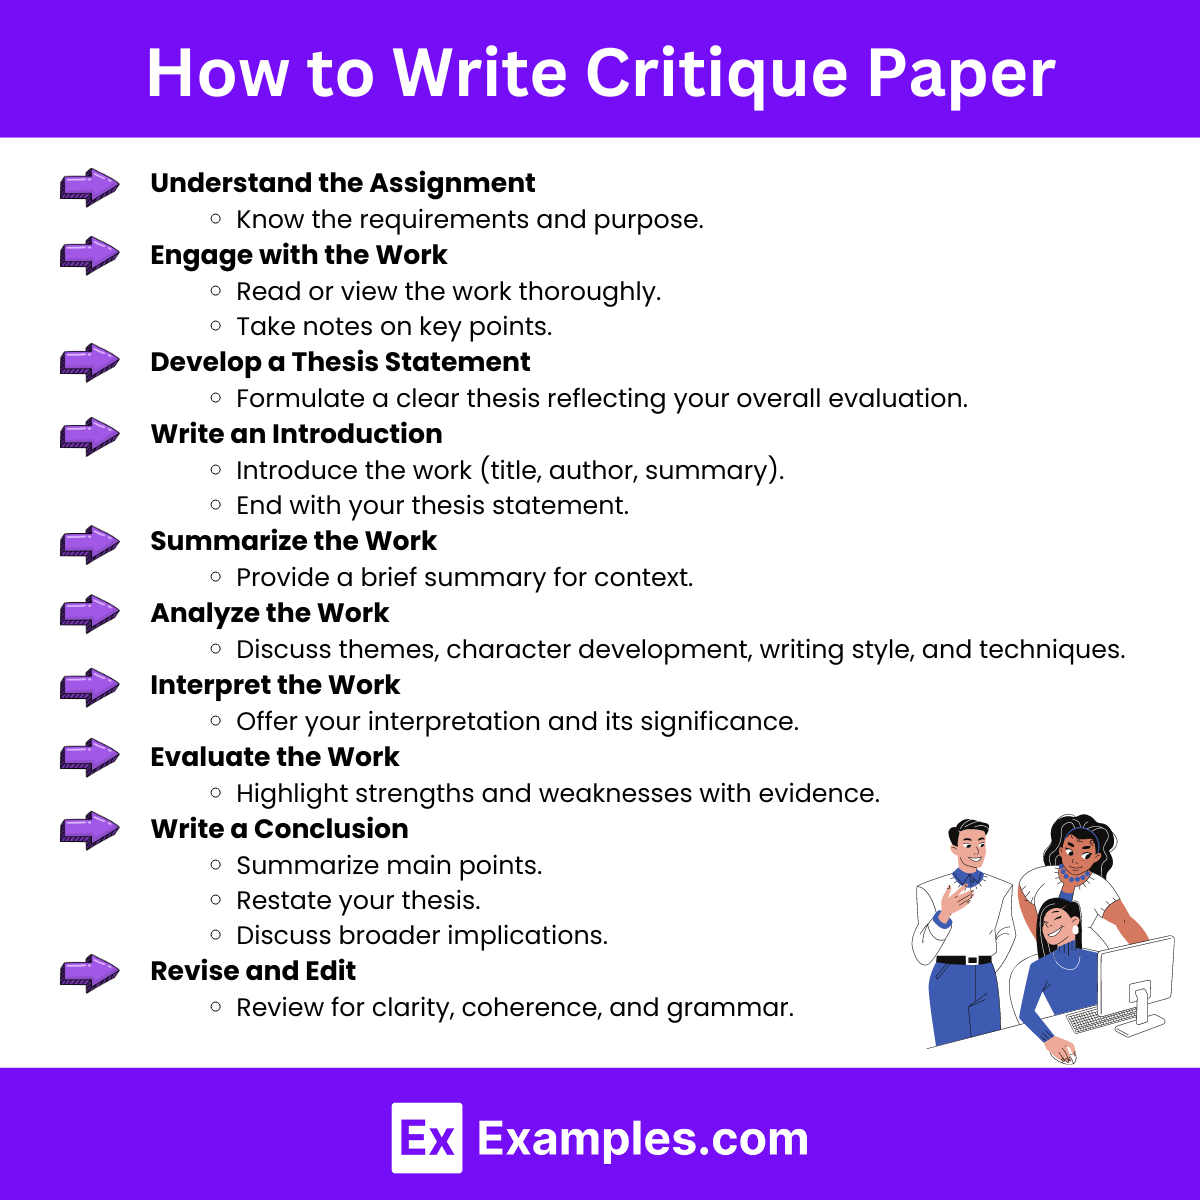 How to Write Critique Paper